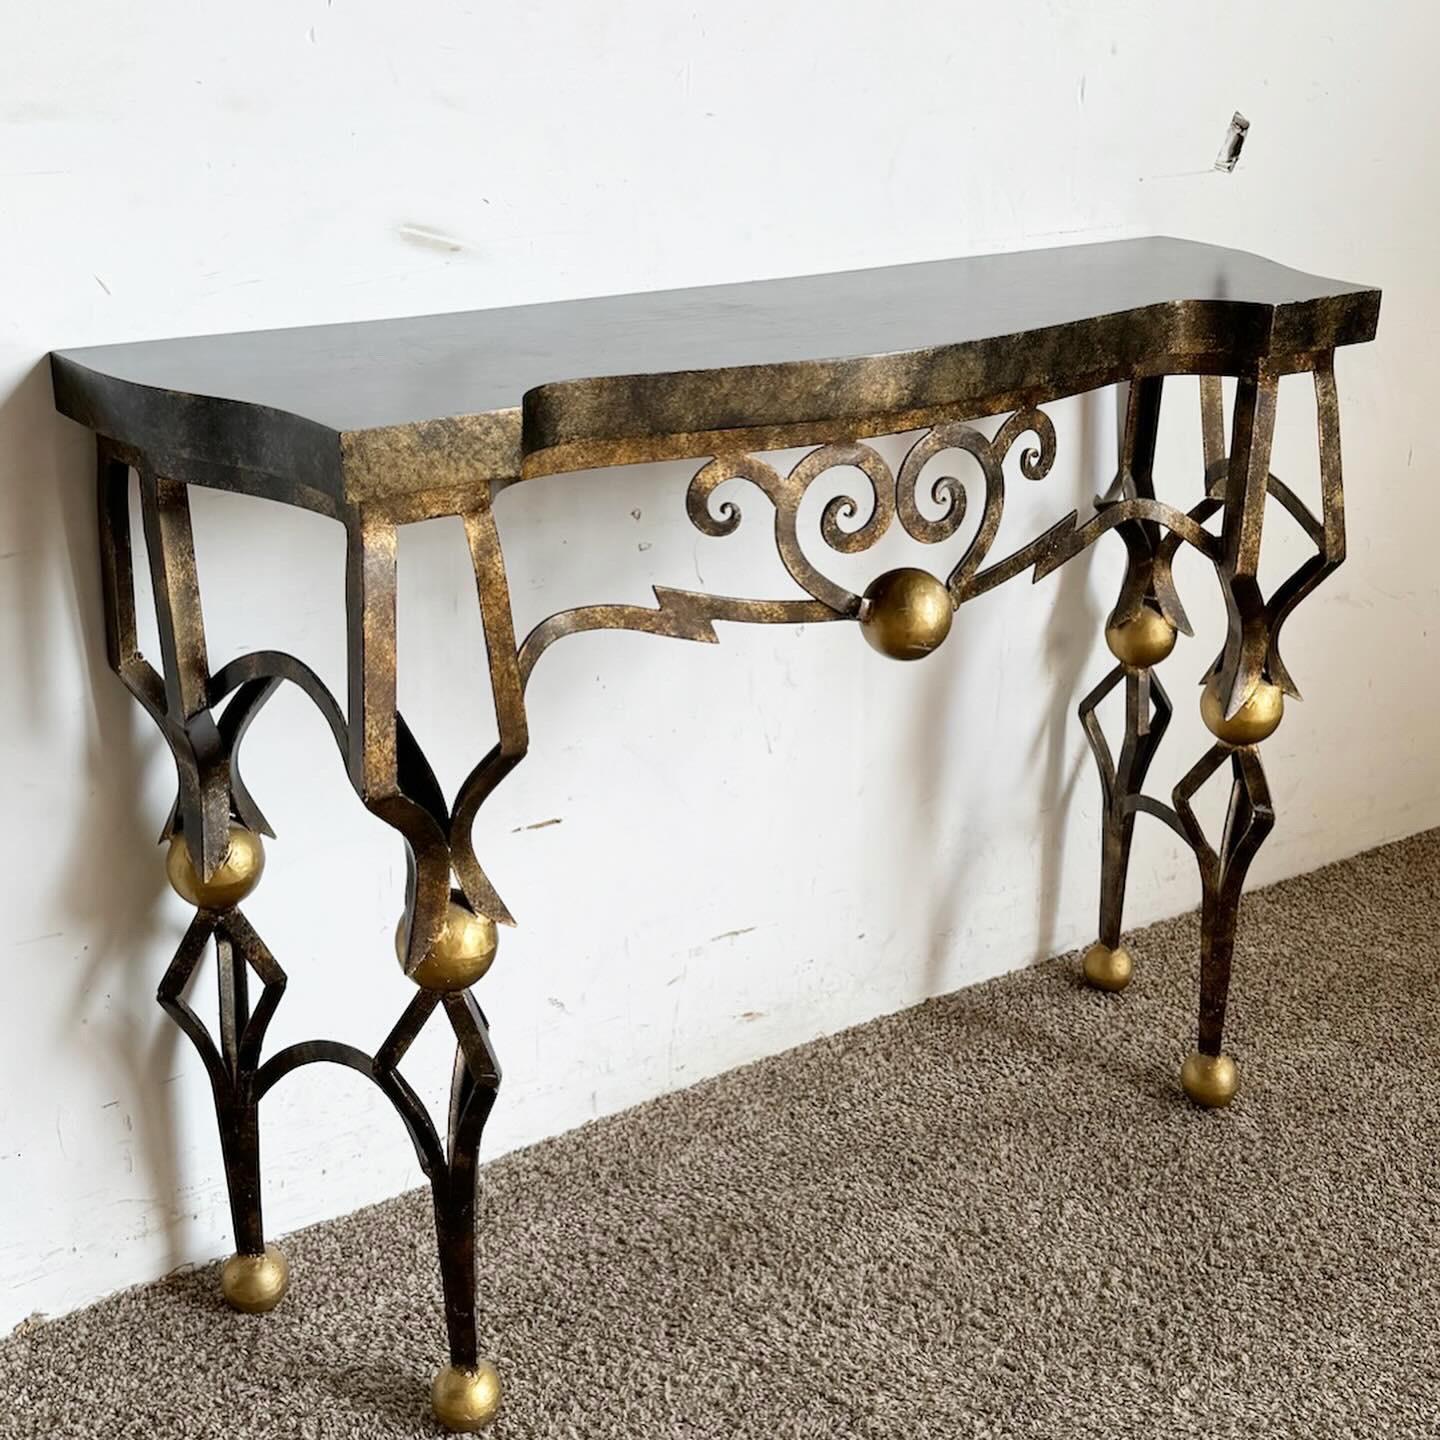 The French Gilbert Poillerat Style Wrought Iron Console Table brings classic French elegance to your interior. Inspired by Gilbert Poillerat's intricate design, it features a skillfully crafted wrought iron base with graceful curves. The ornate yet